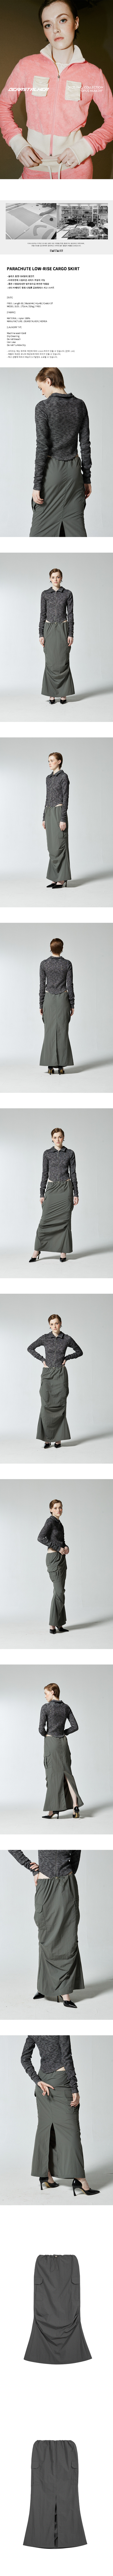 PARACHUTE LOW-RISE CARGO SKIRT - CHARCOAL